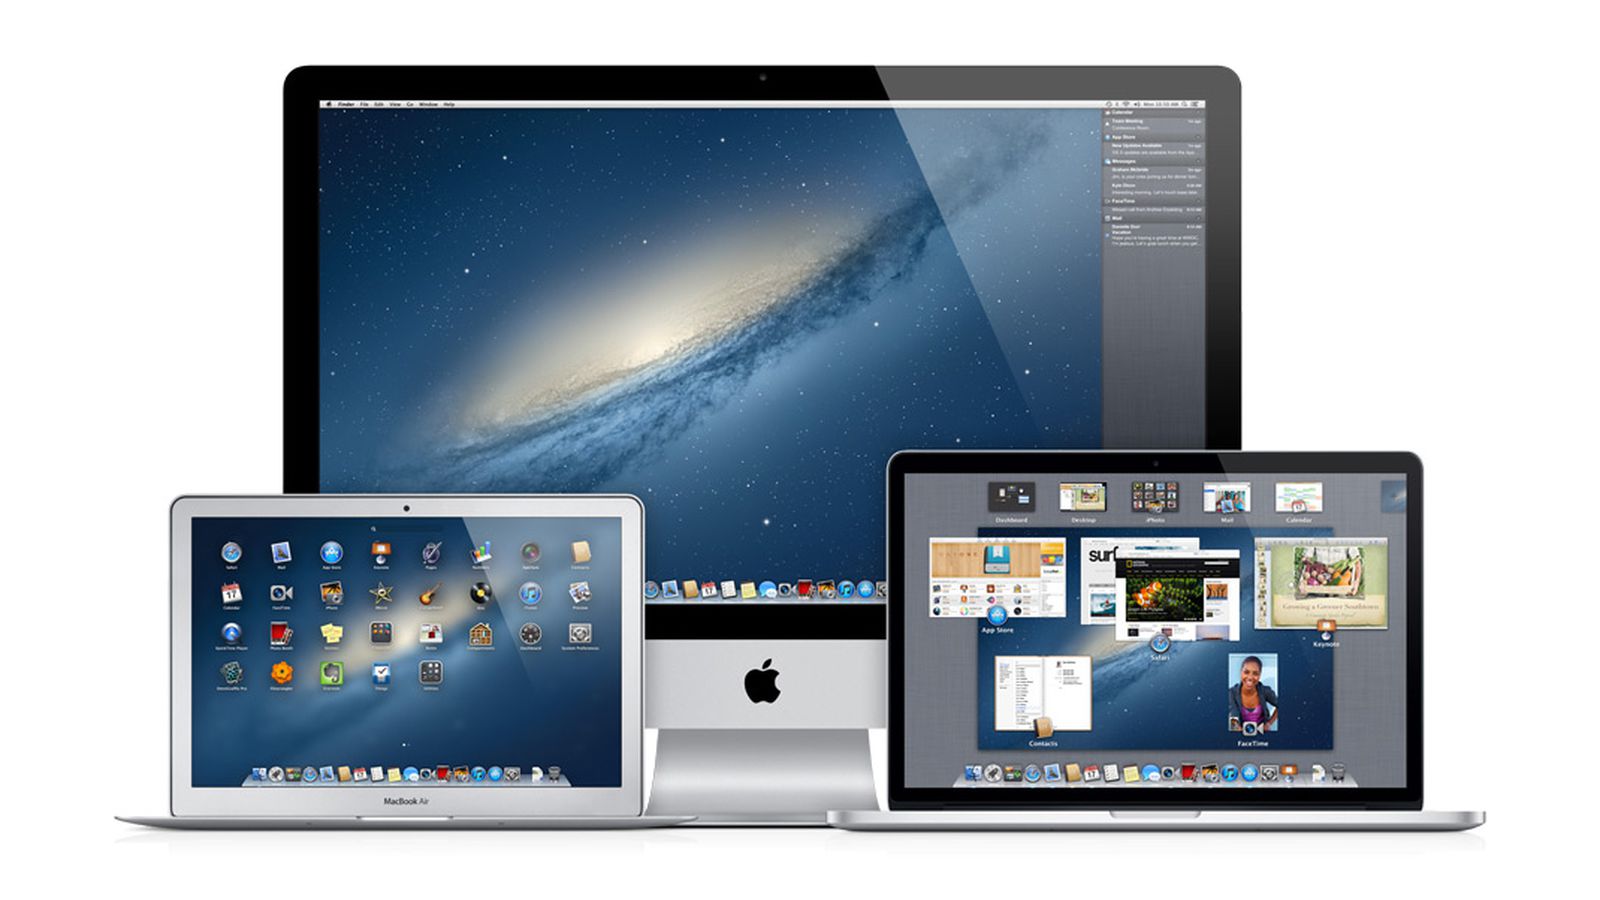 download free mac project software for os x 10.7